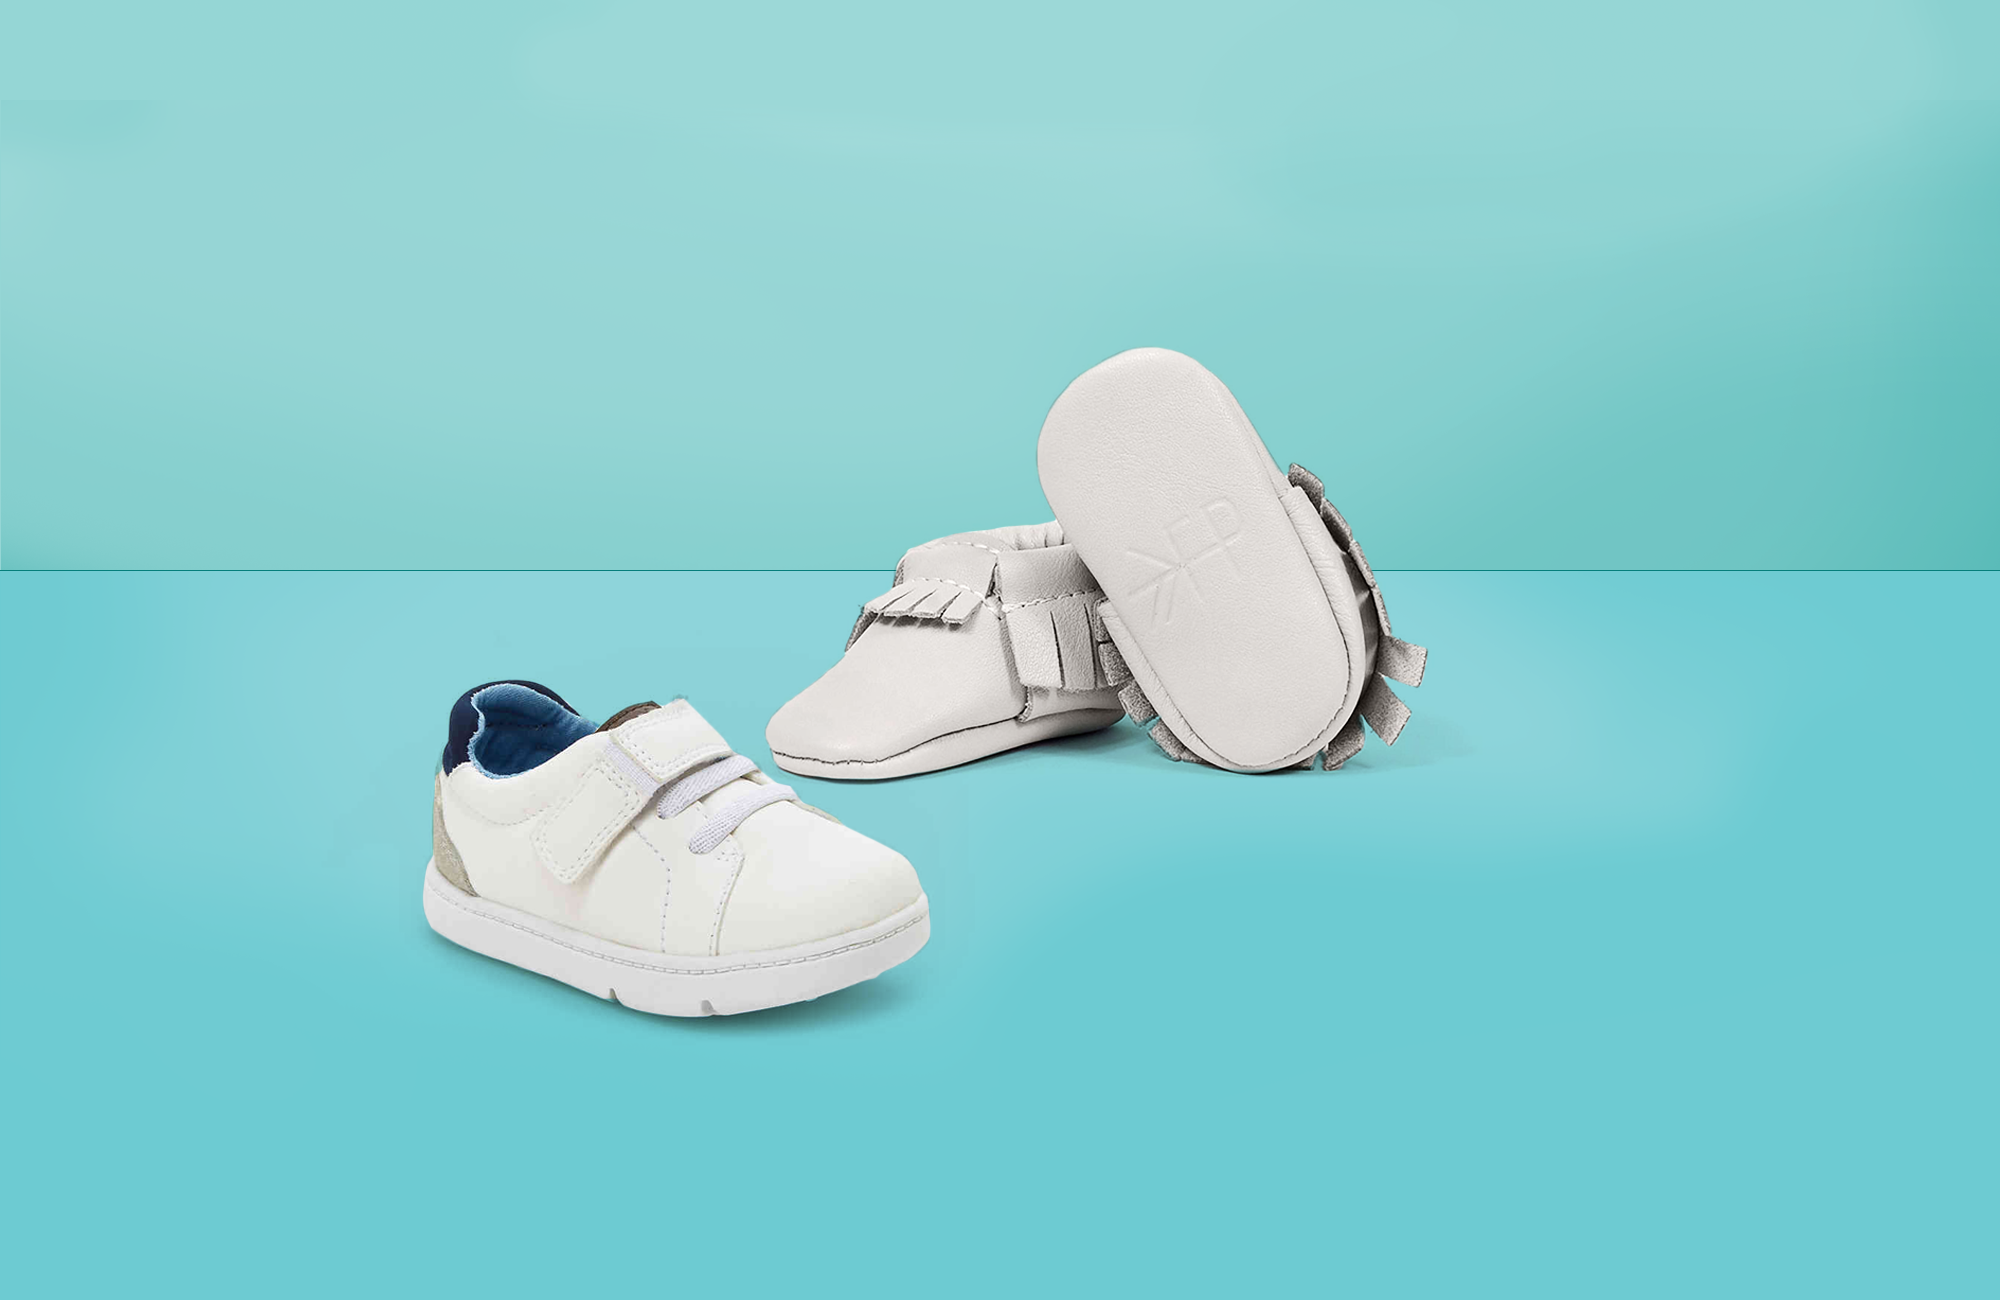 The Best Baby Walking Shoes - Top Rated 